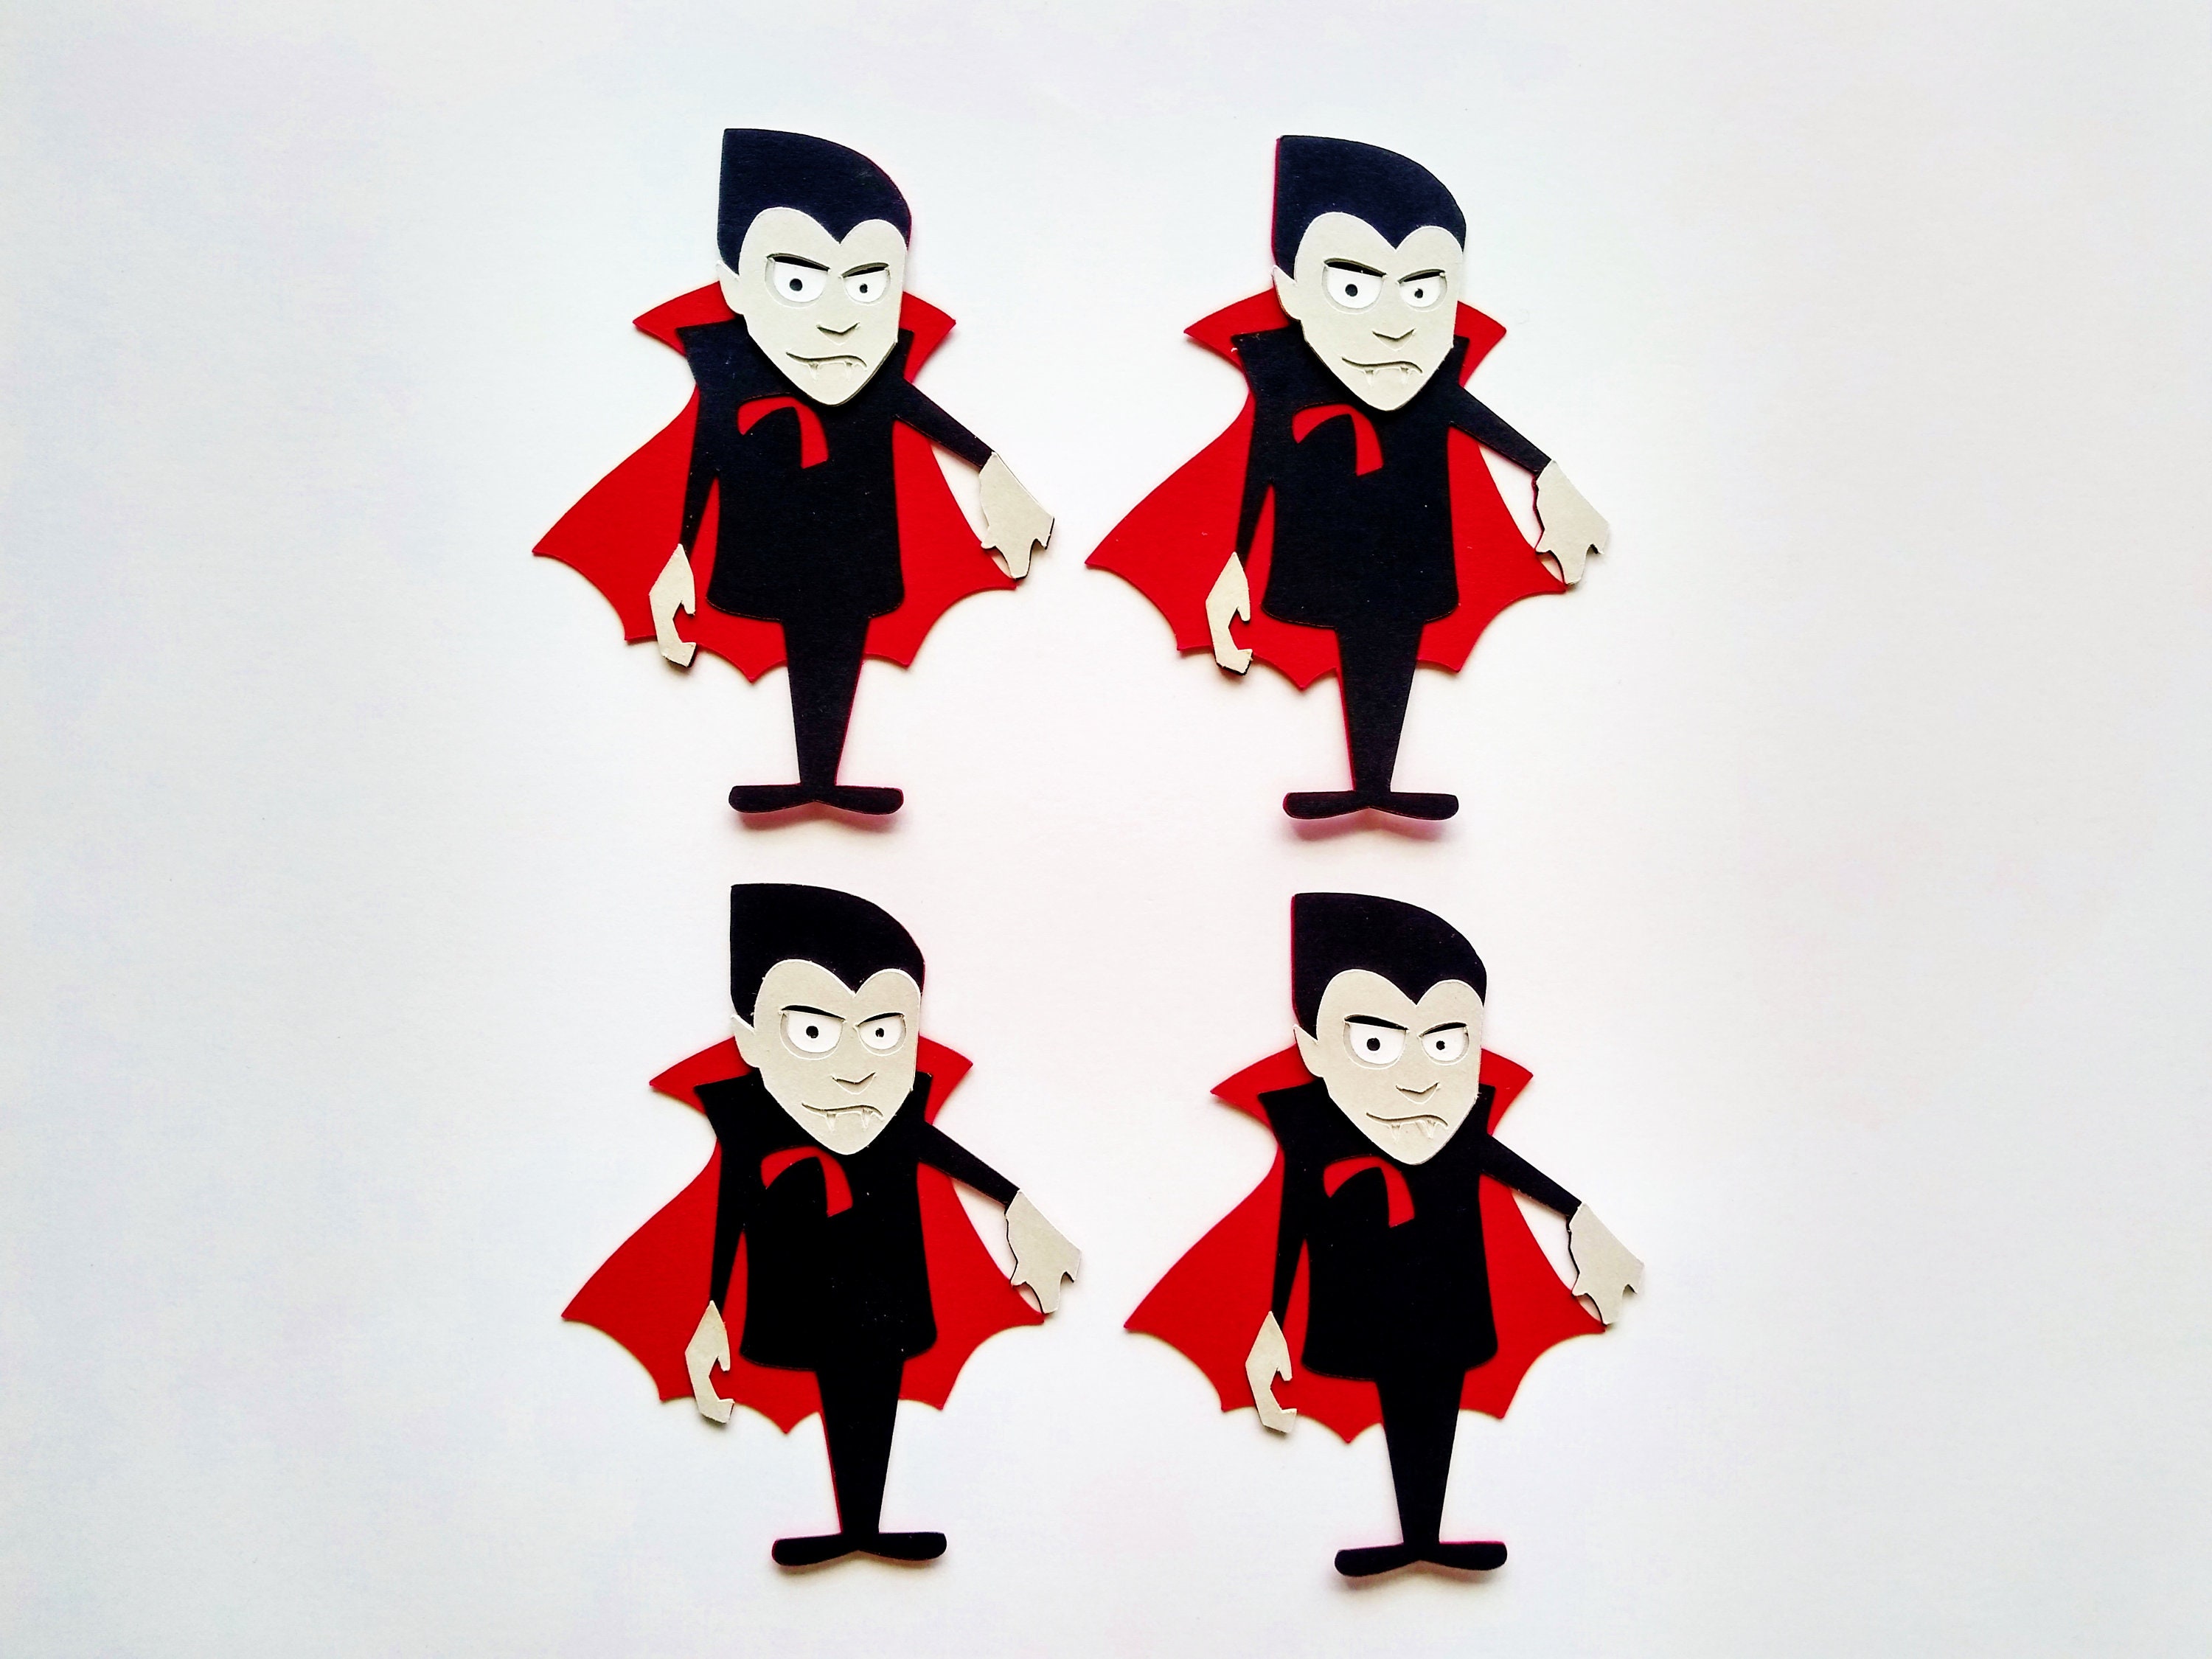 Halloween: Dracula Die-Cut Character - Removable Wall Adhesive Wall Decal Giant Character +2 Wall Decals 25W x 49H